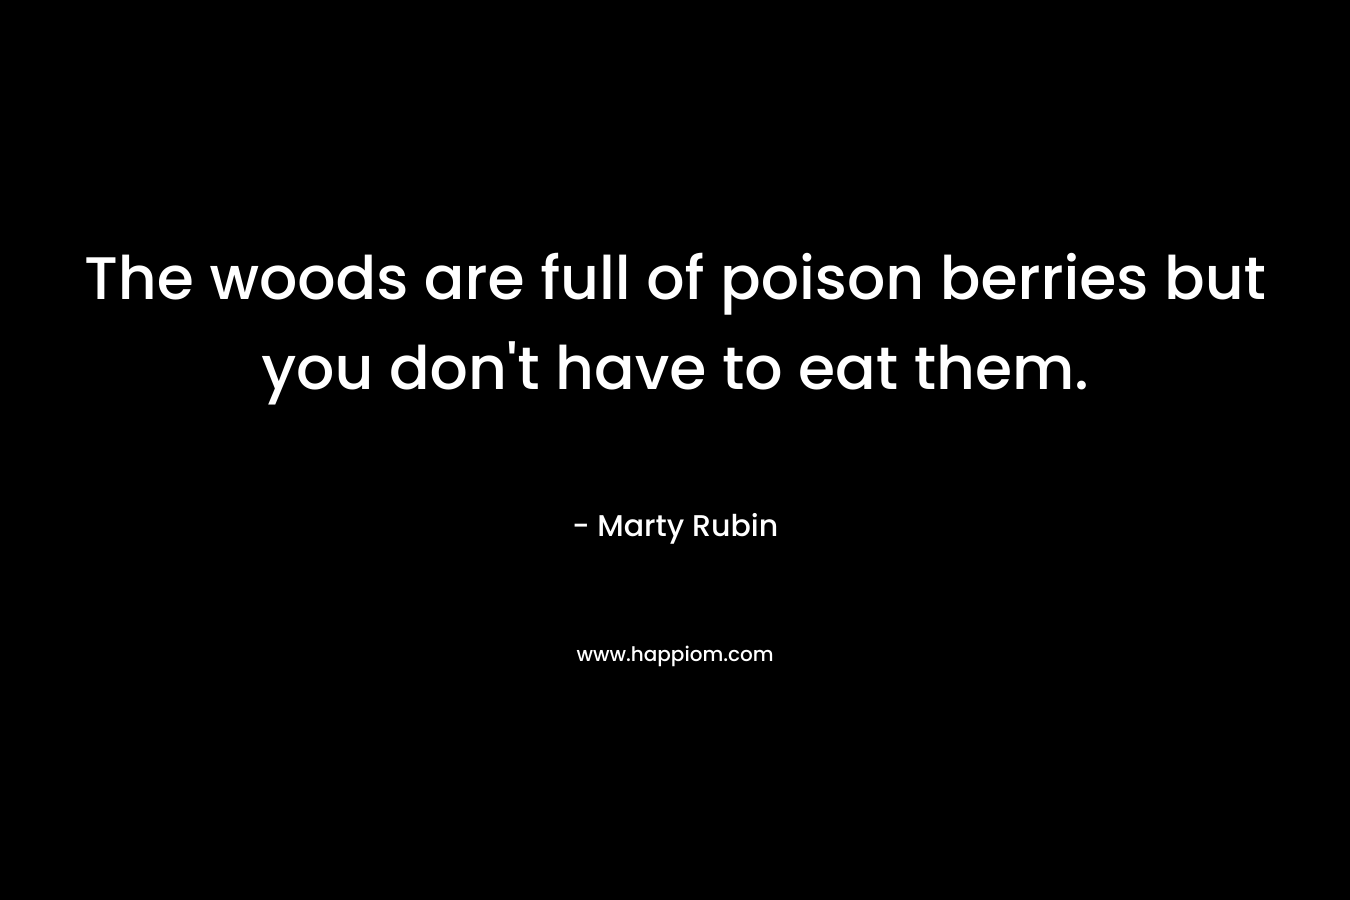 The woods are full of poison berries but you don’t have to eat them. – Marty Rubin